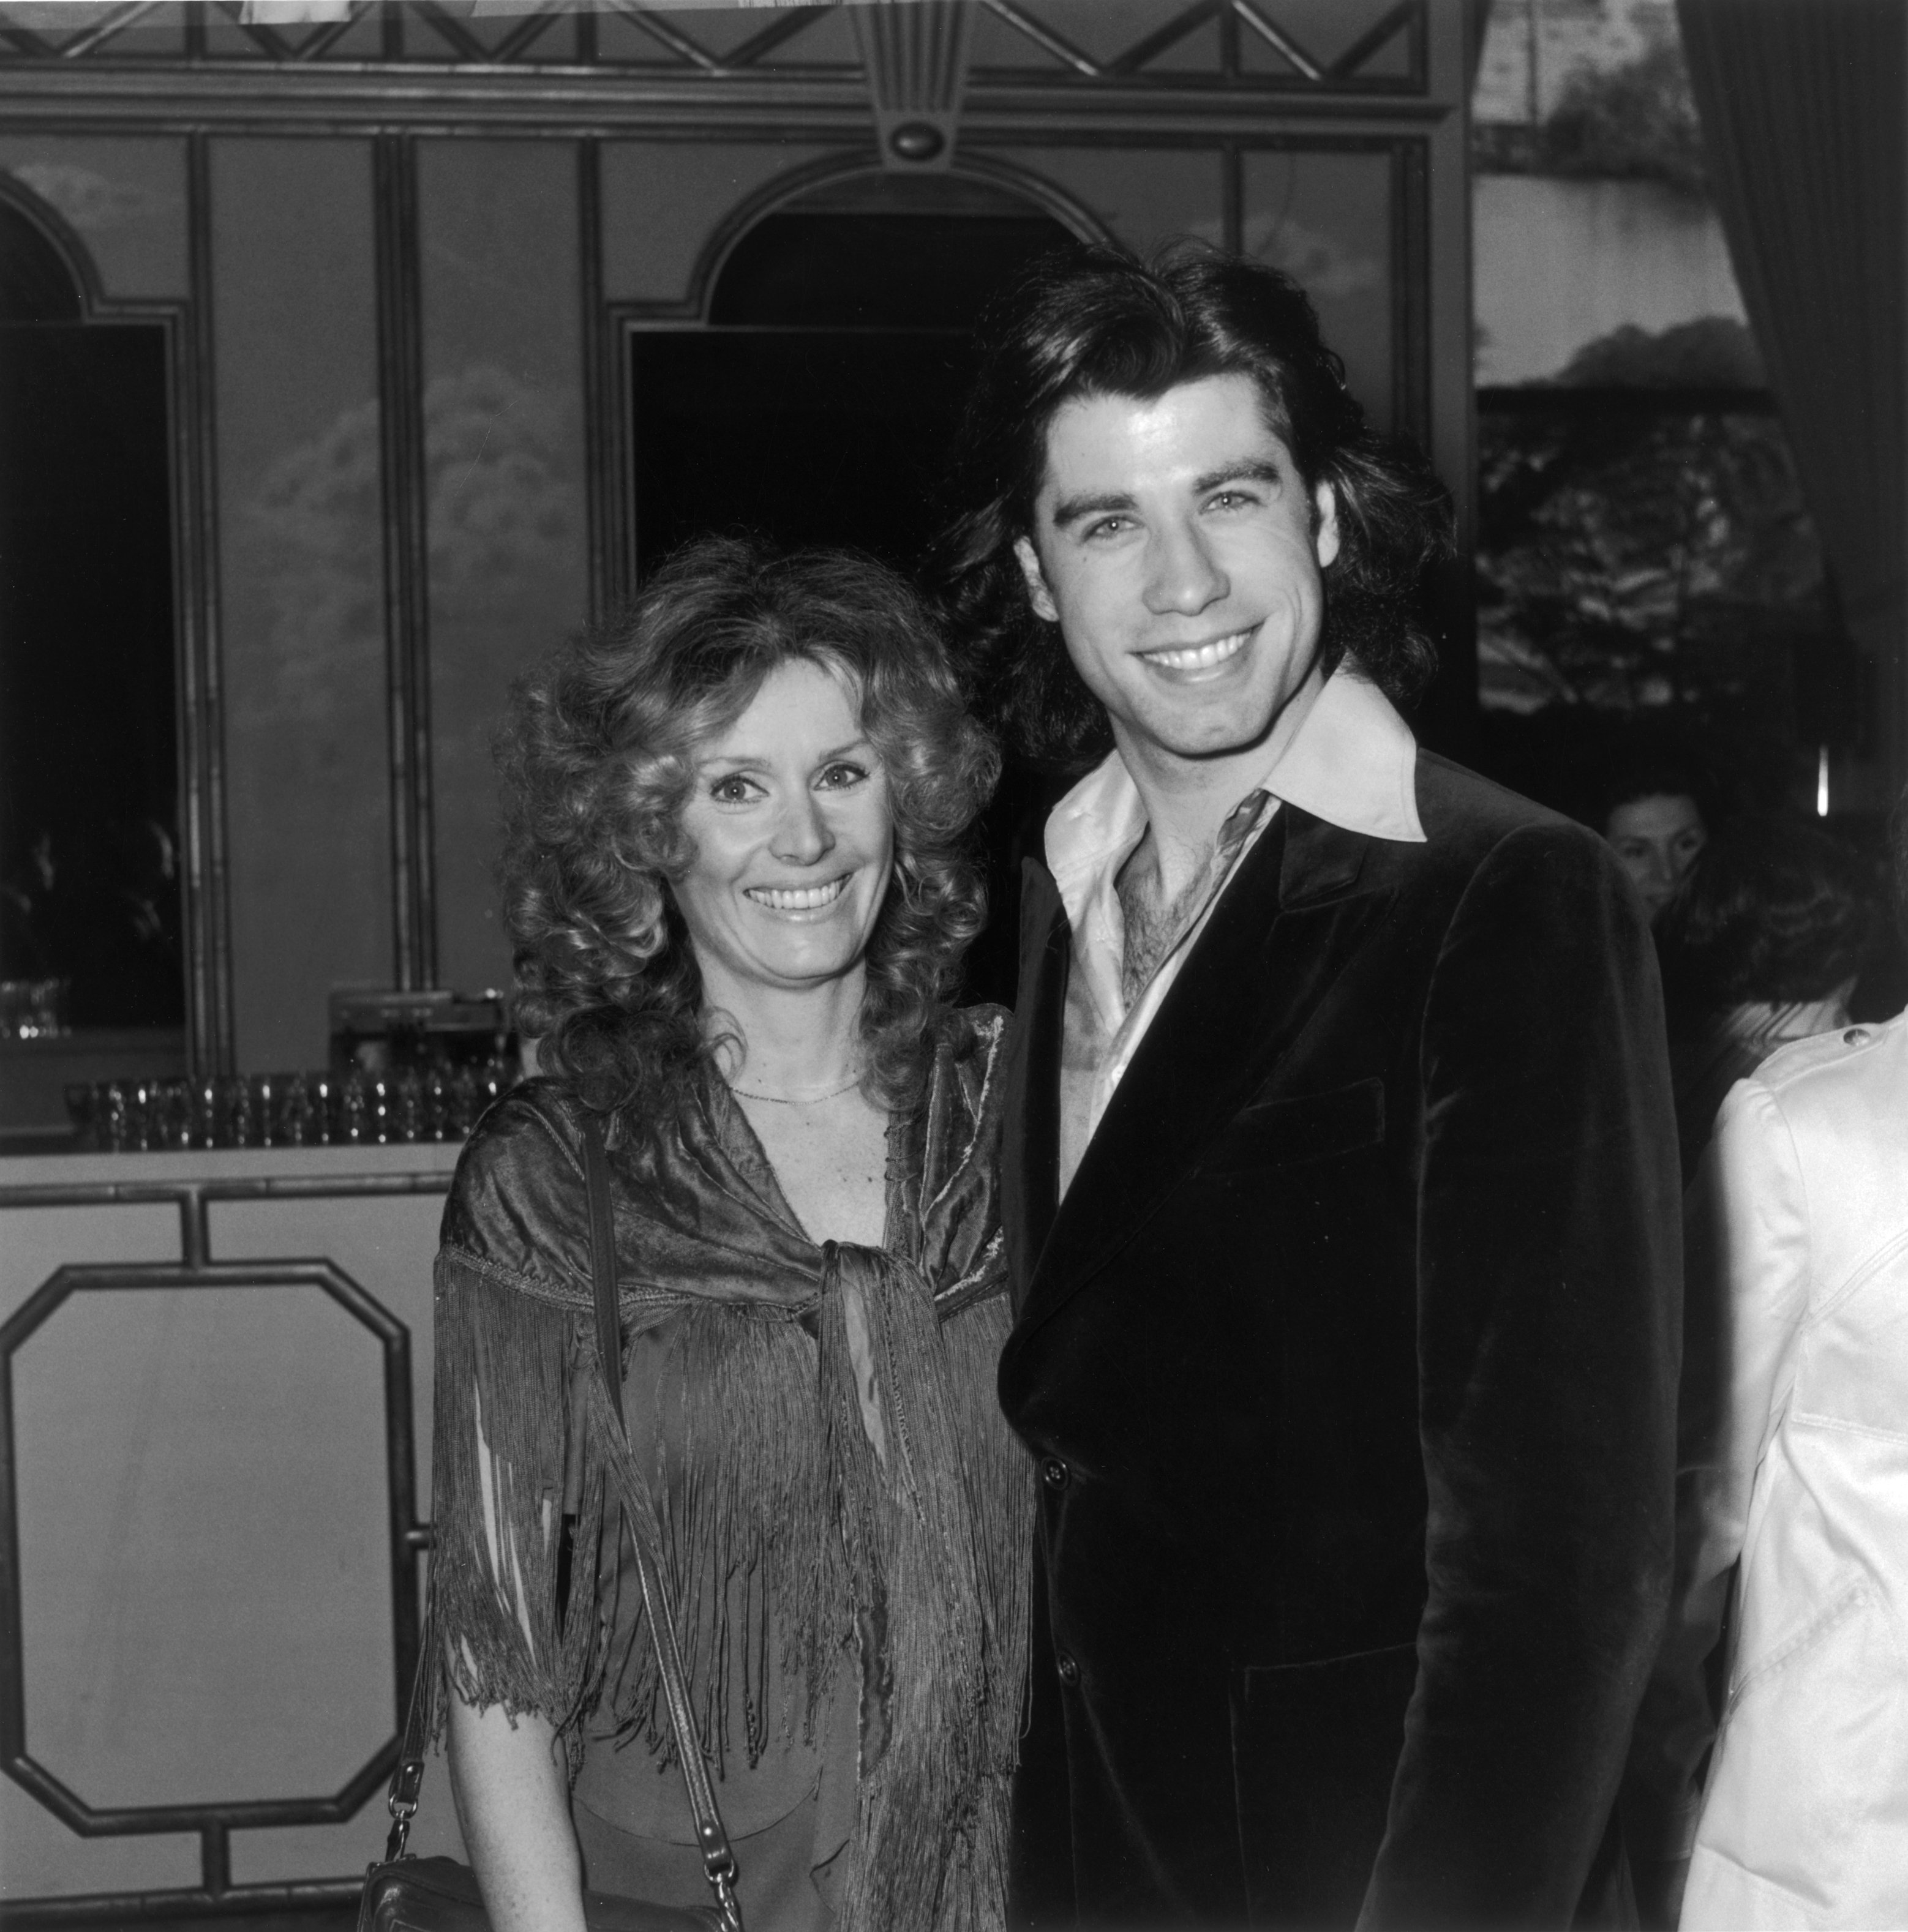 John Travolta and Diana Hyland during the 36th Annual Golden Apple Awards at the Beverly Wilshire Hotel in December 1976, Beverly Hills, California. / Source: Getty Images